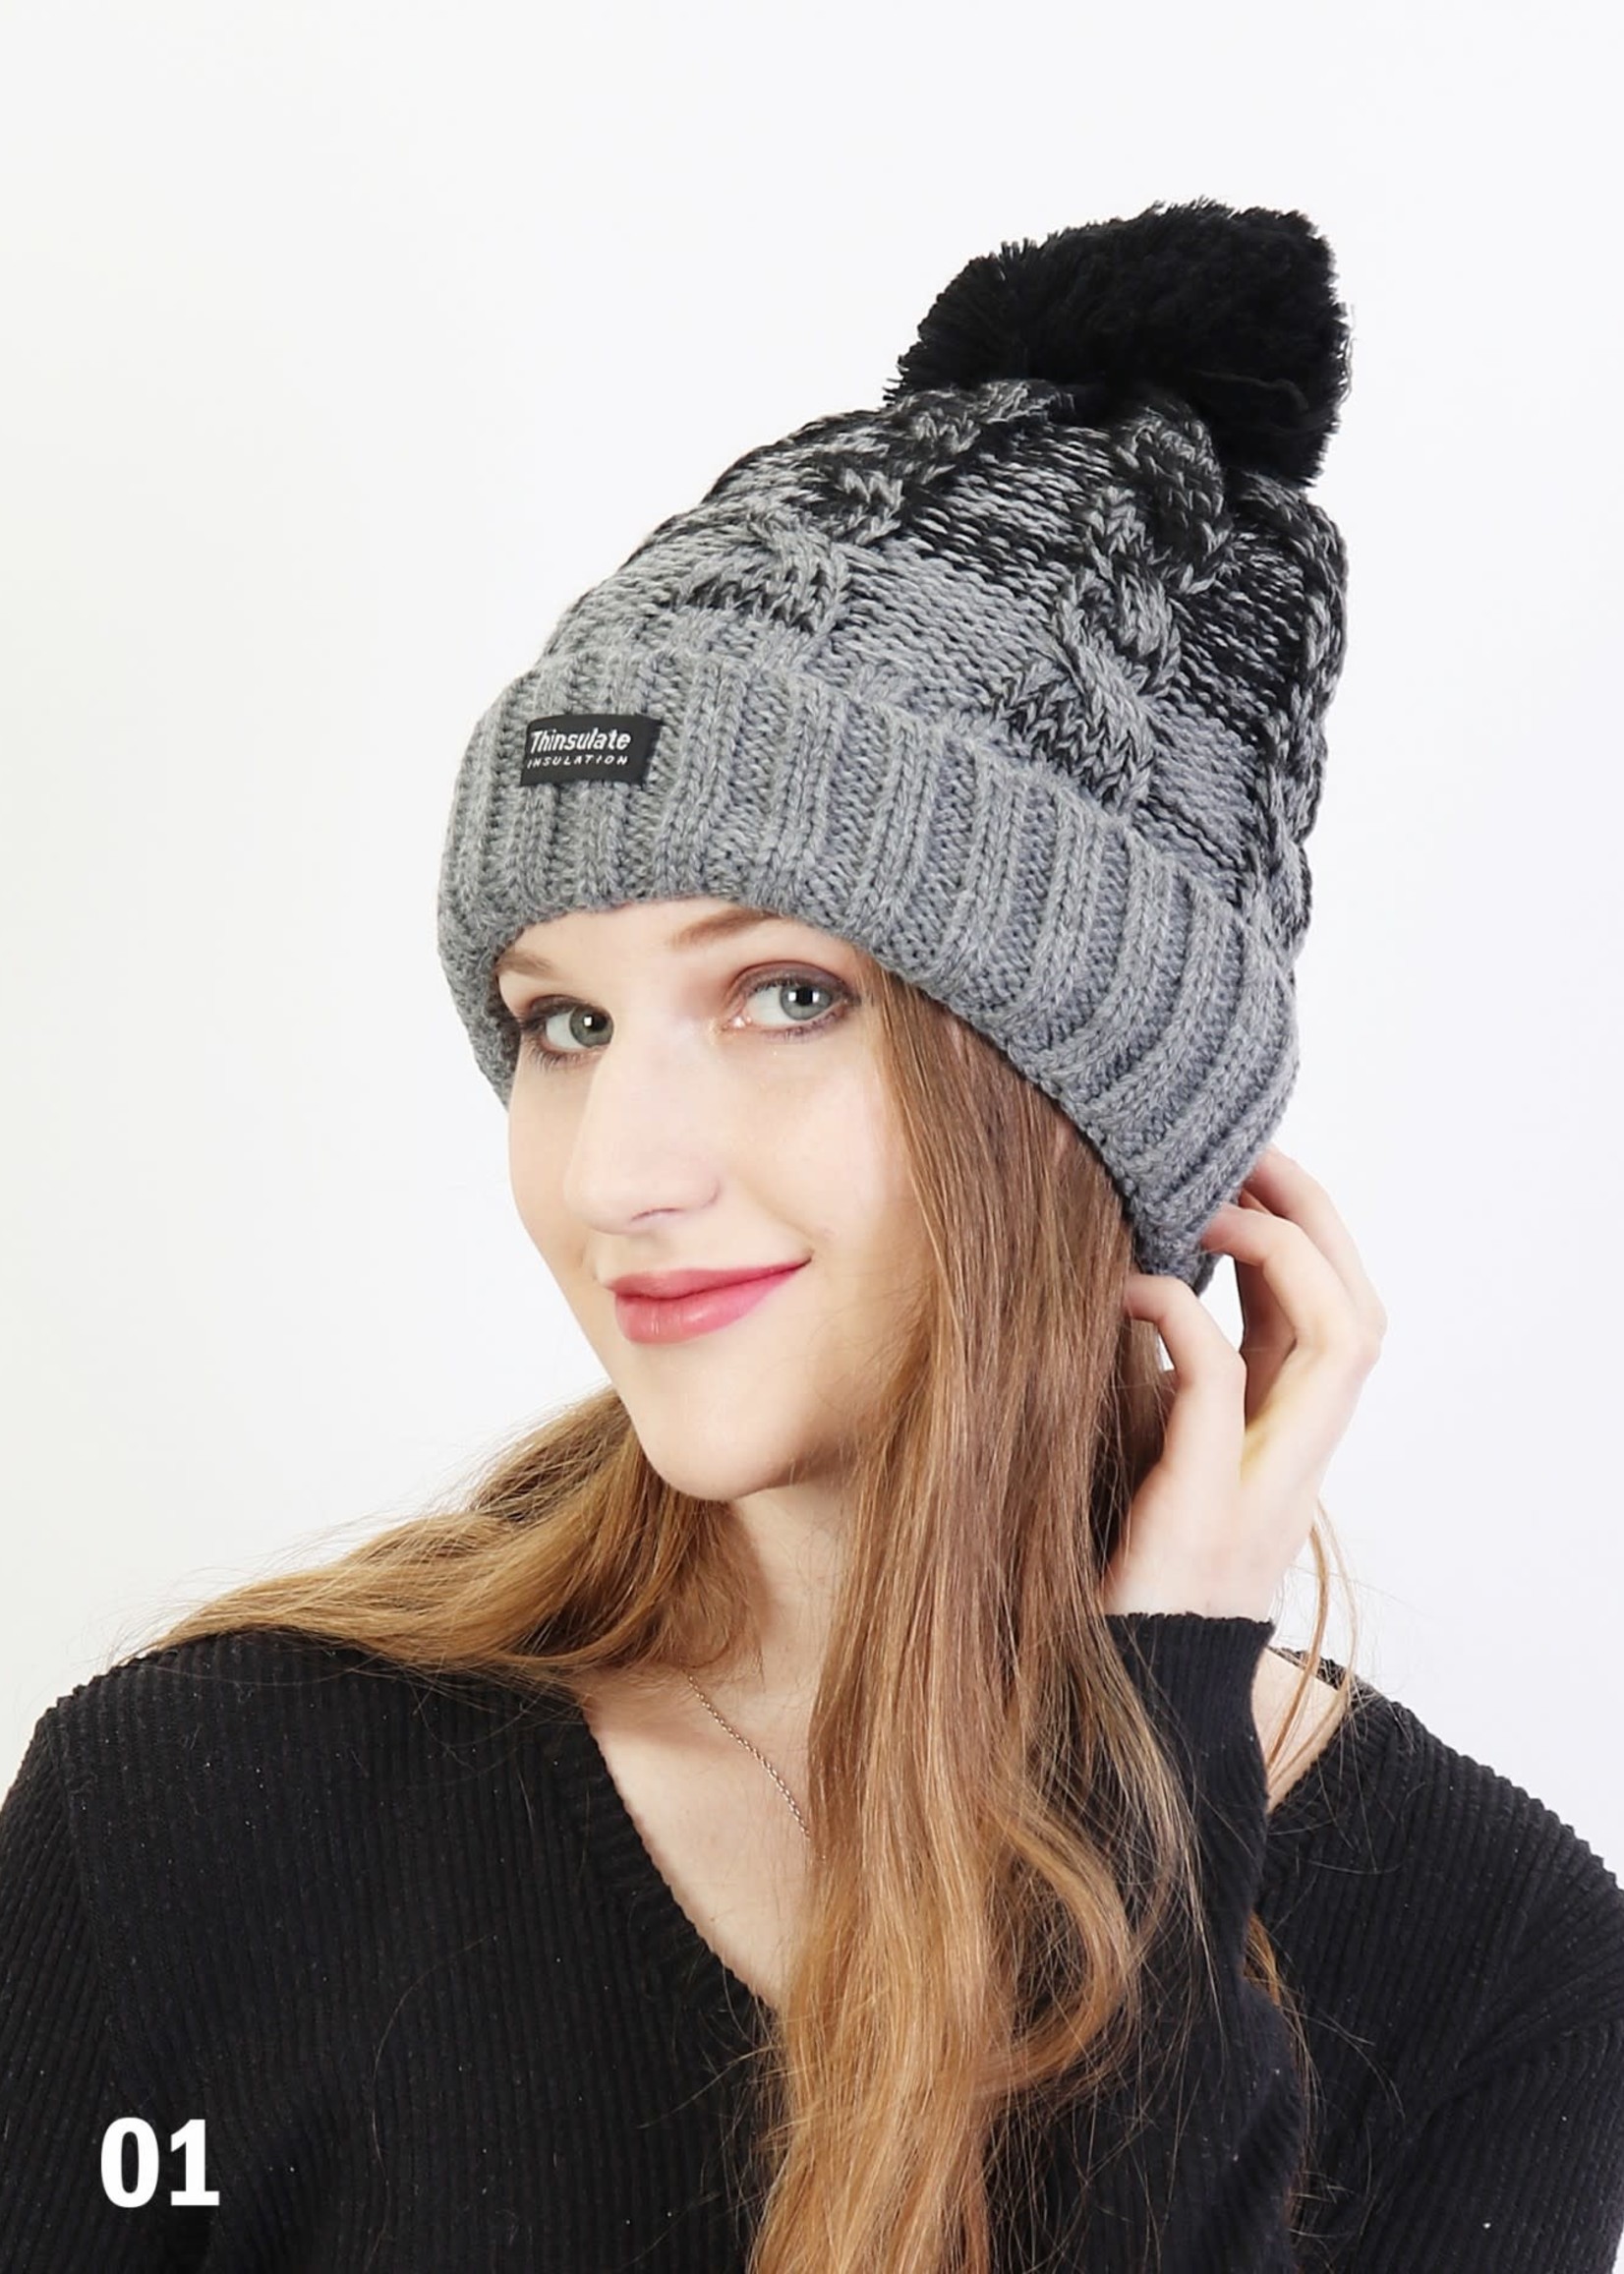 Cheri Bliss Two Tone Knitted Hat Black/Grey